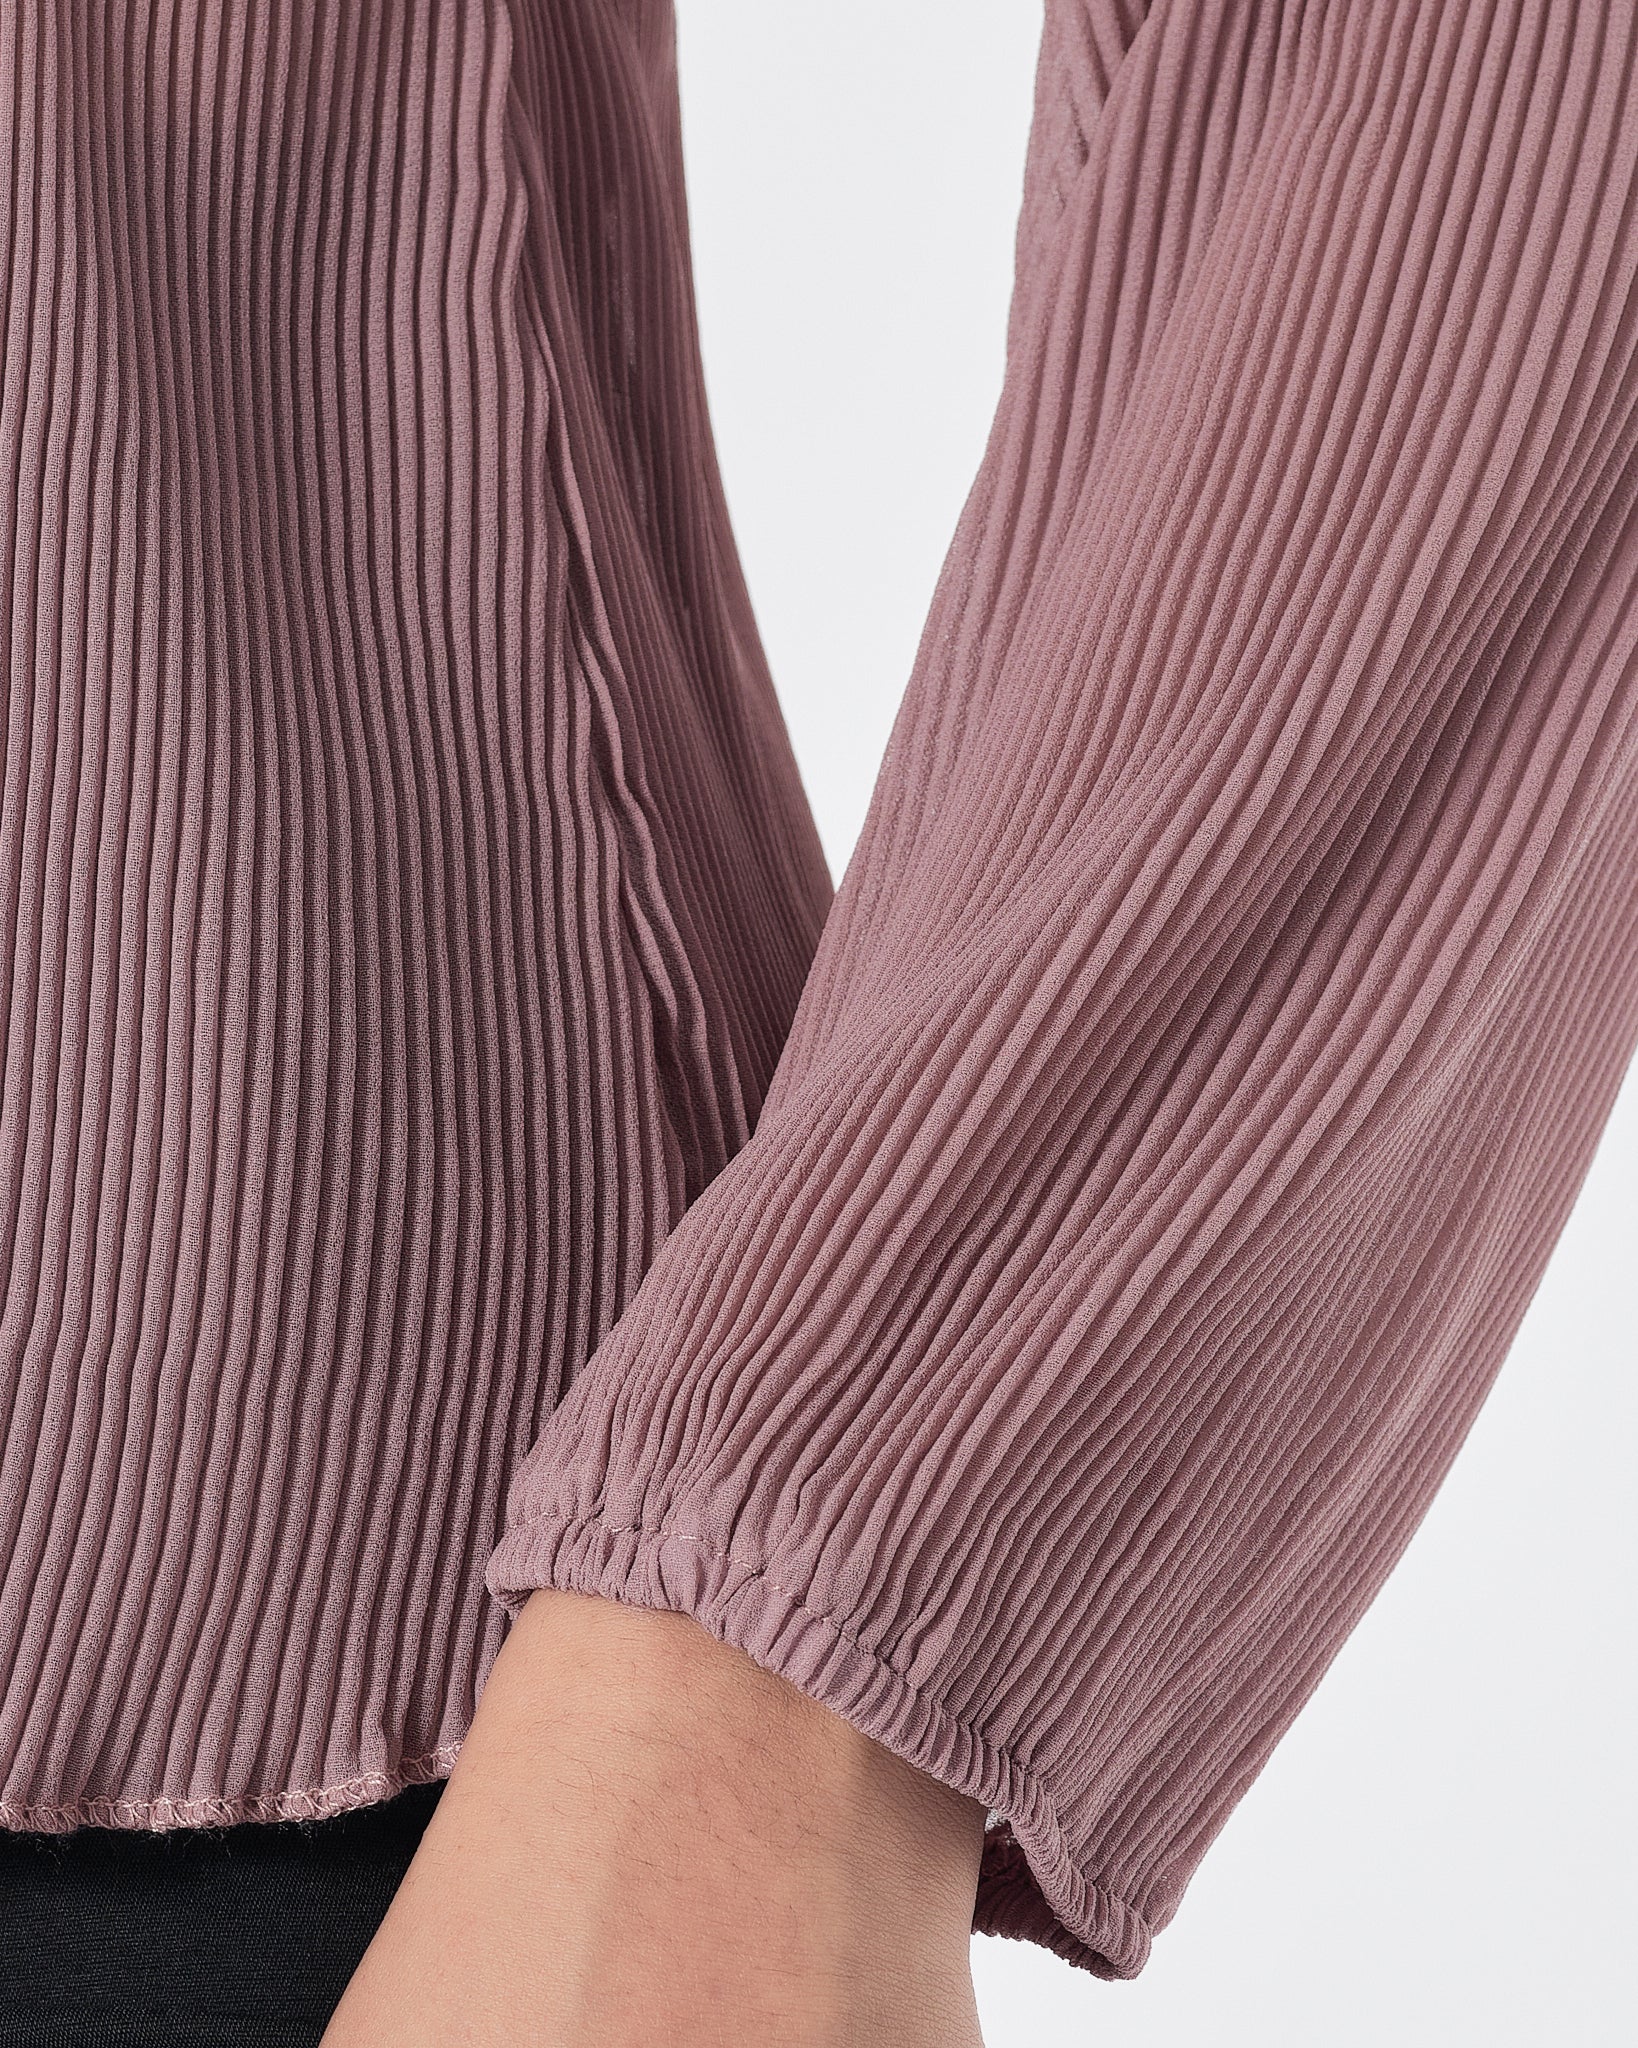 Lady Pleated Pink  Shirts Long Sleeve 14.90